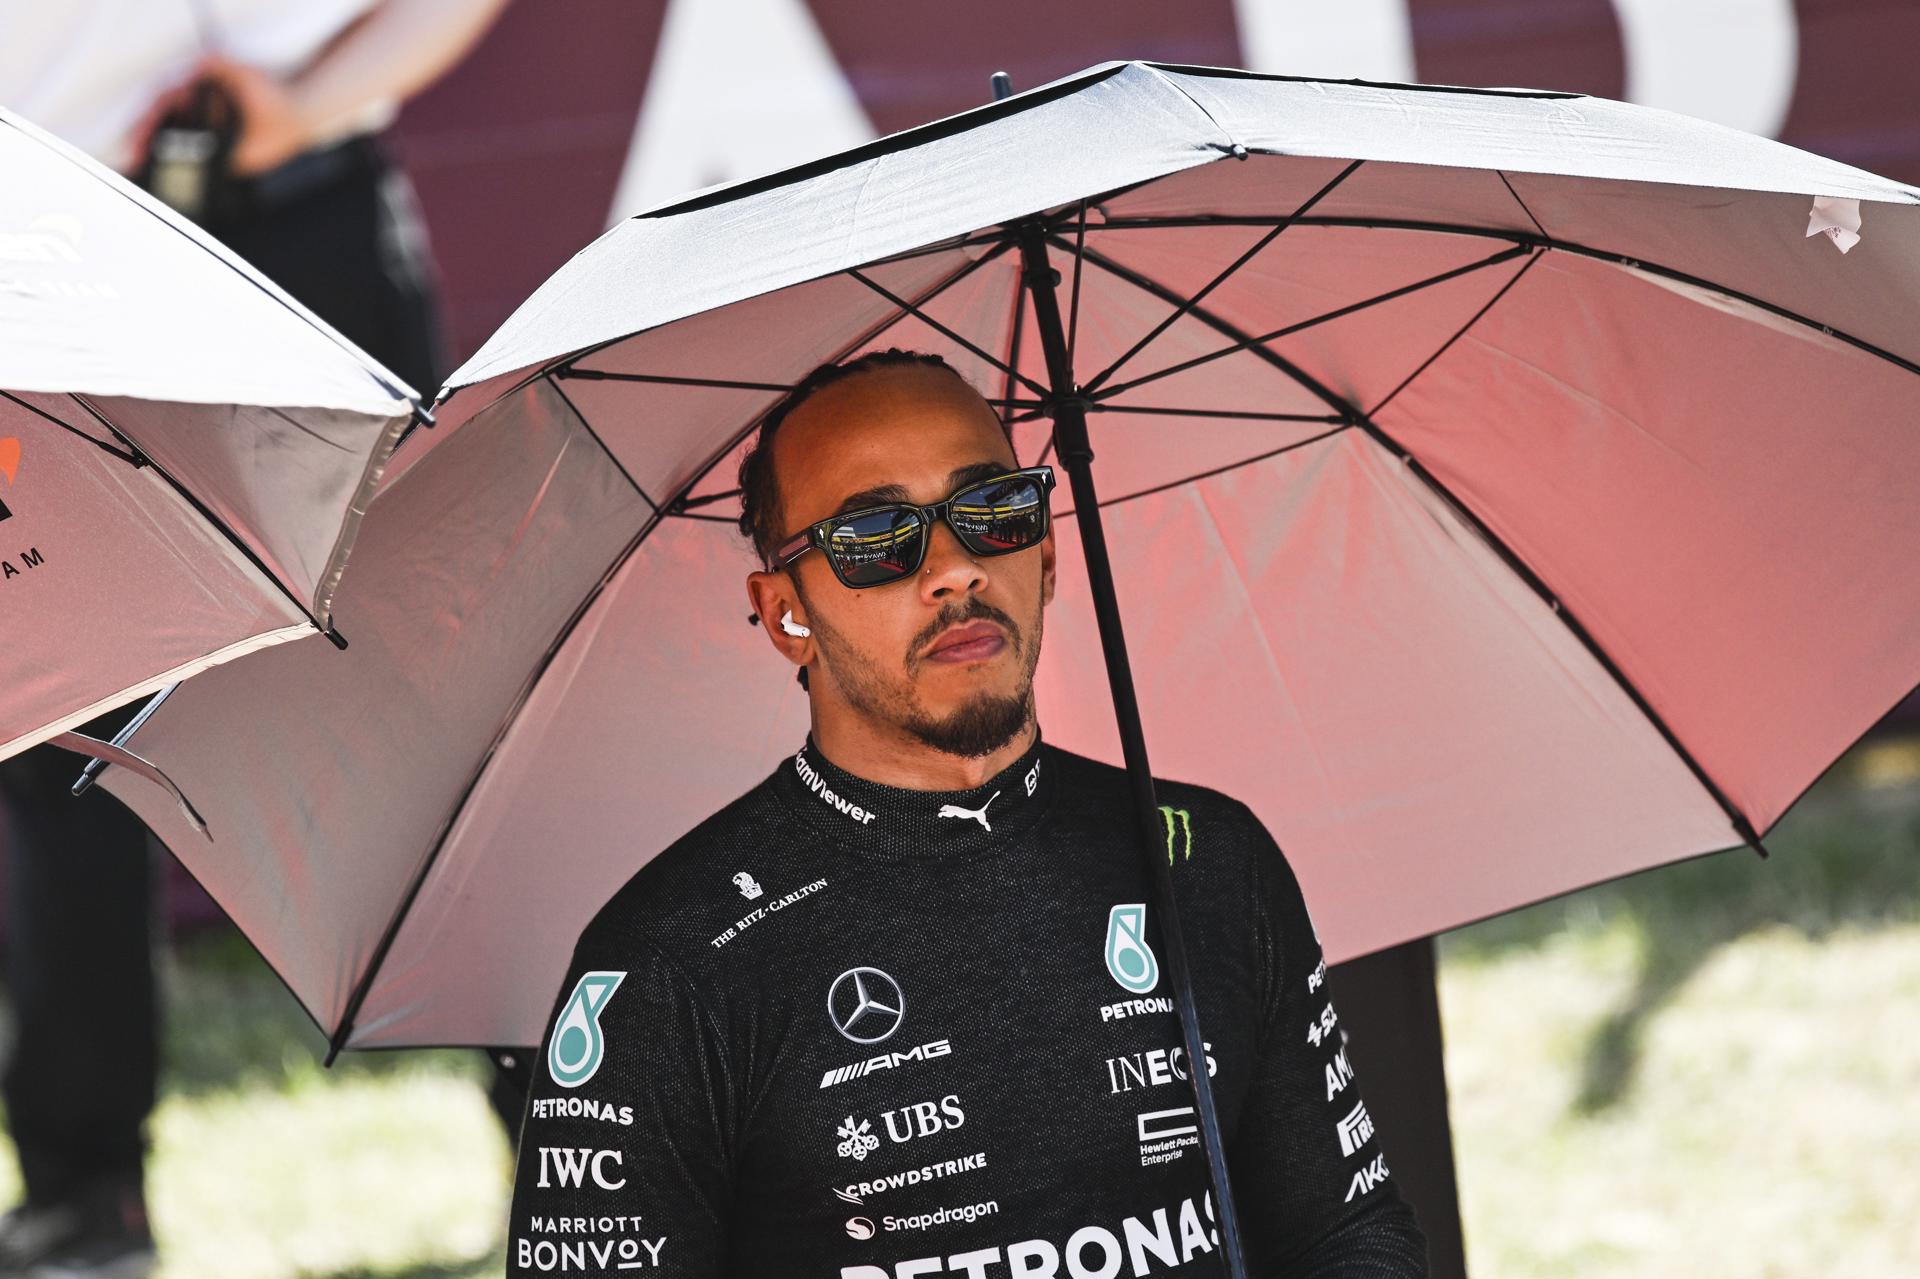 Lewis Hamilton prepares to compete in the Formula One Hungarian Grand Prix at the Hungaroring in Mogyorod, Hungary, on 23 July 2023. EFE/EPA/Zoltan Balogh HUNGARY OUT
